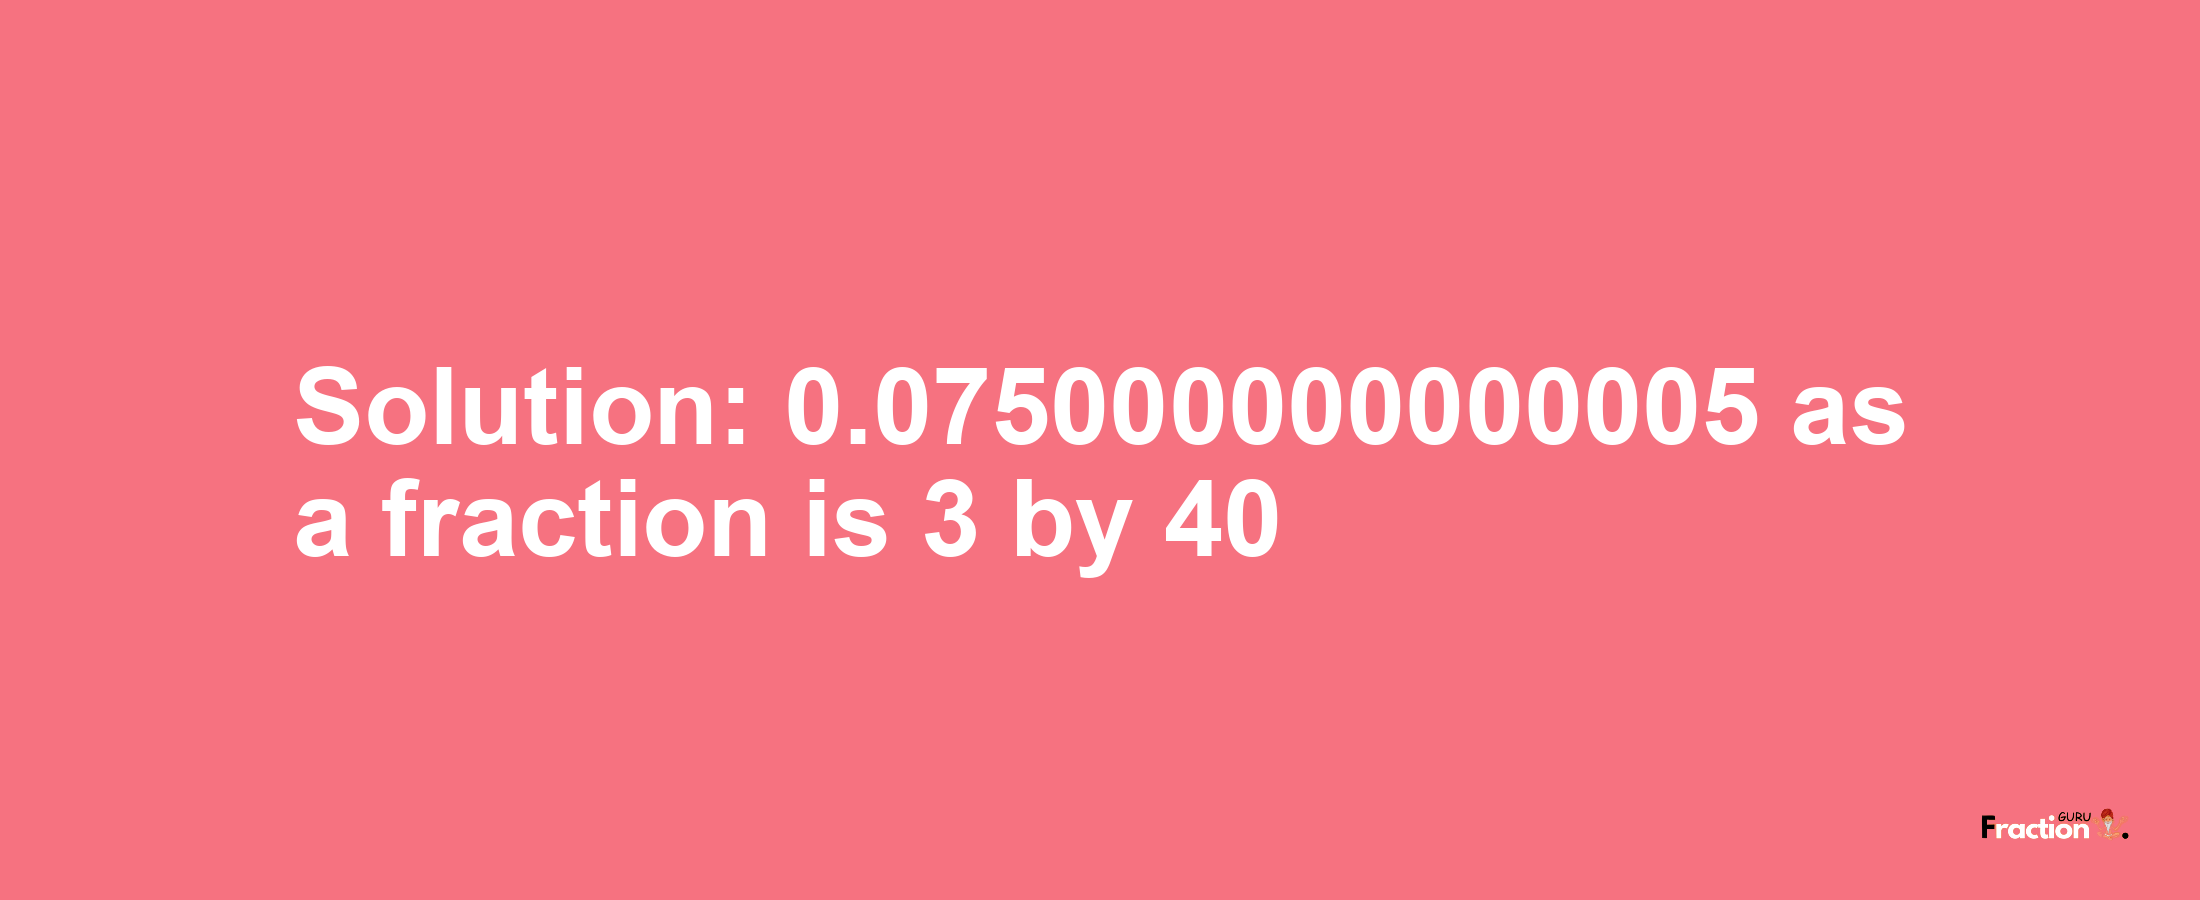 Solution:0.075000000000005 as a fraction is 3/40